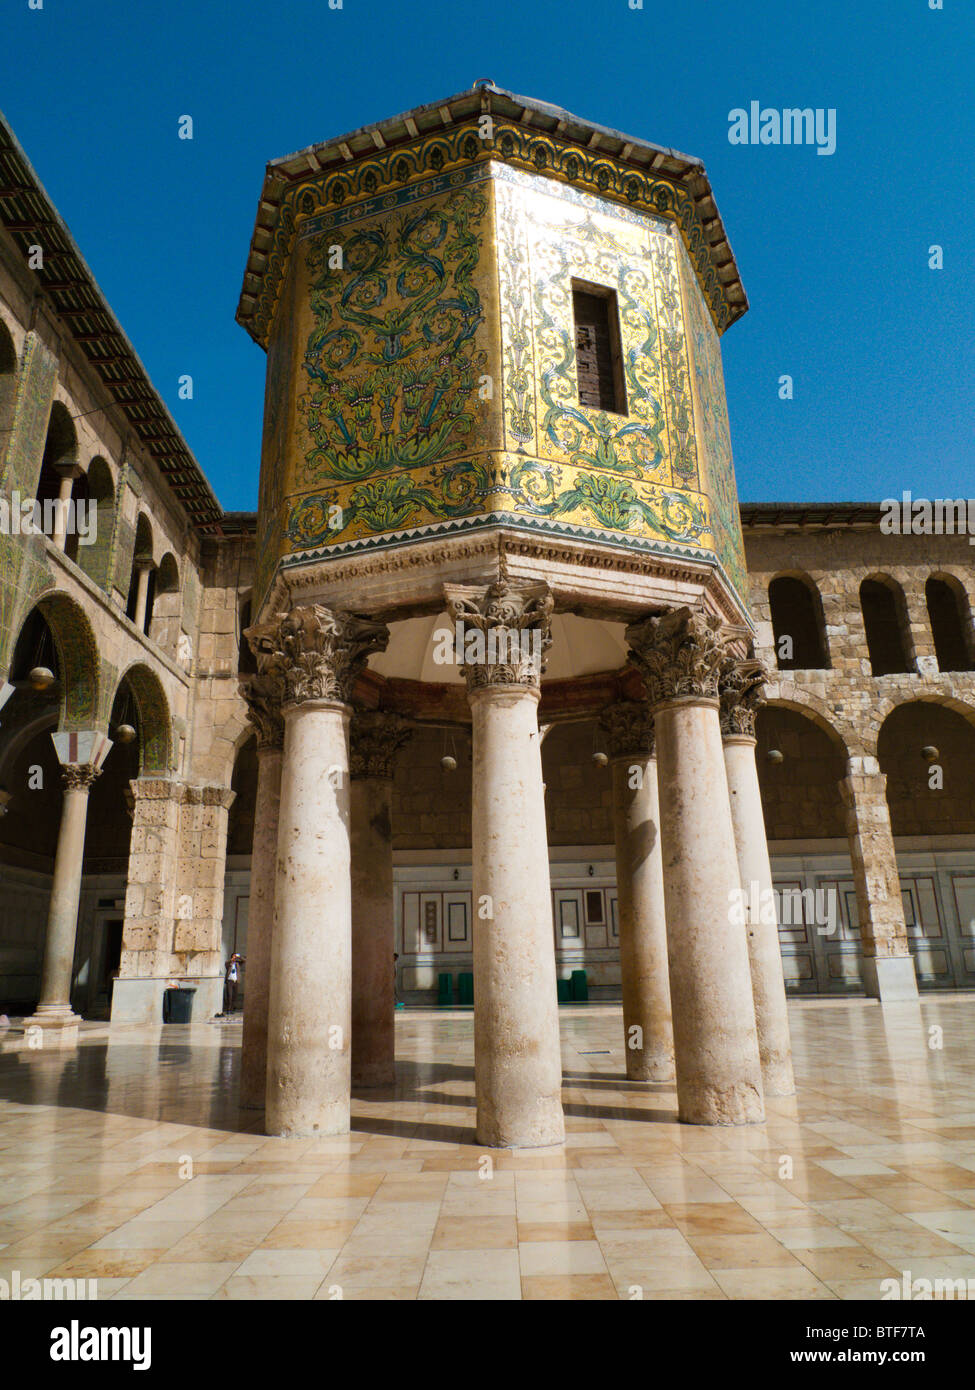 Ummayad Mosque Completed In 715AD Also Known As The Grand Mosque of Damascus, Damascus Syria The Middle East Stock Photo